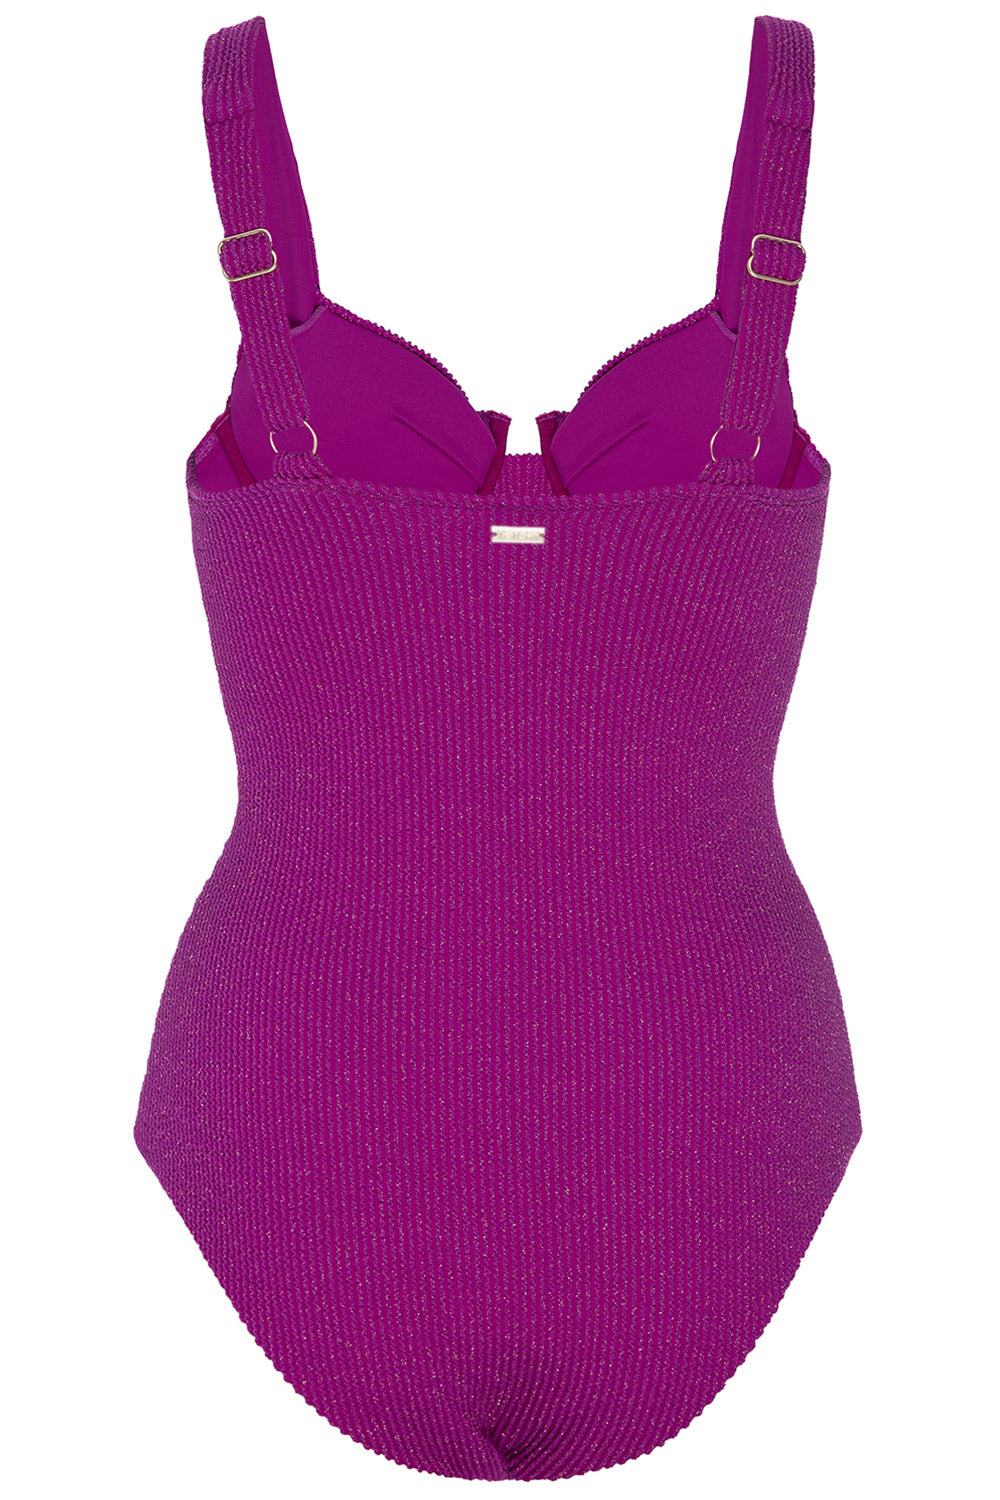 Back view of the Stellar berry swimsuit on a white background